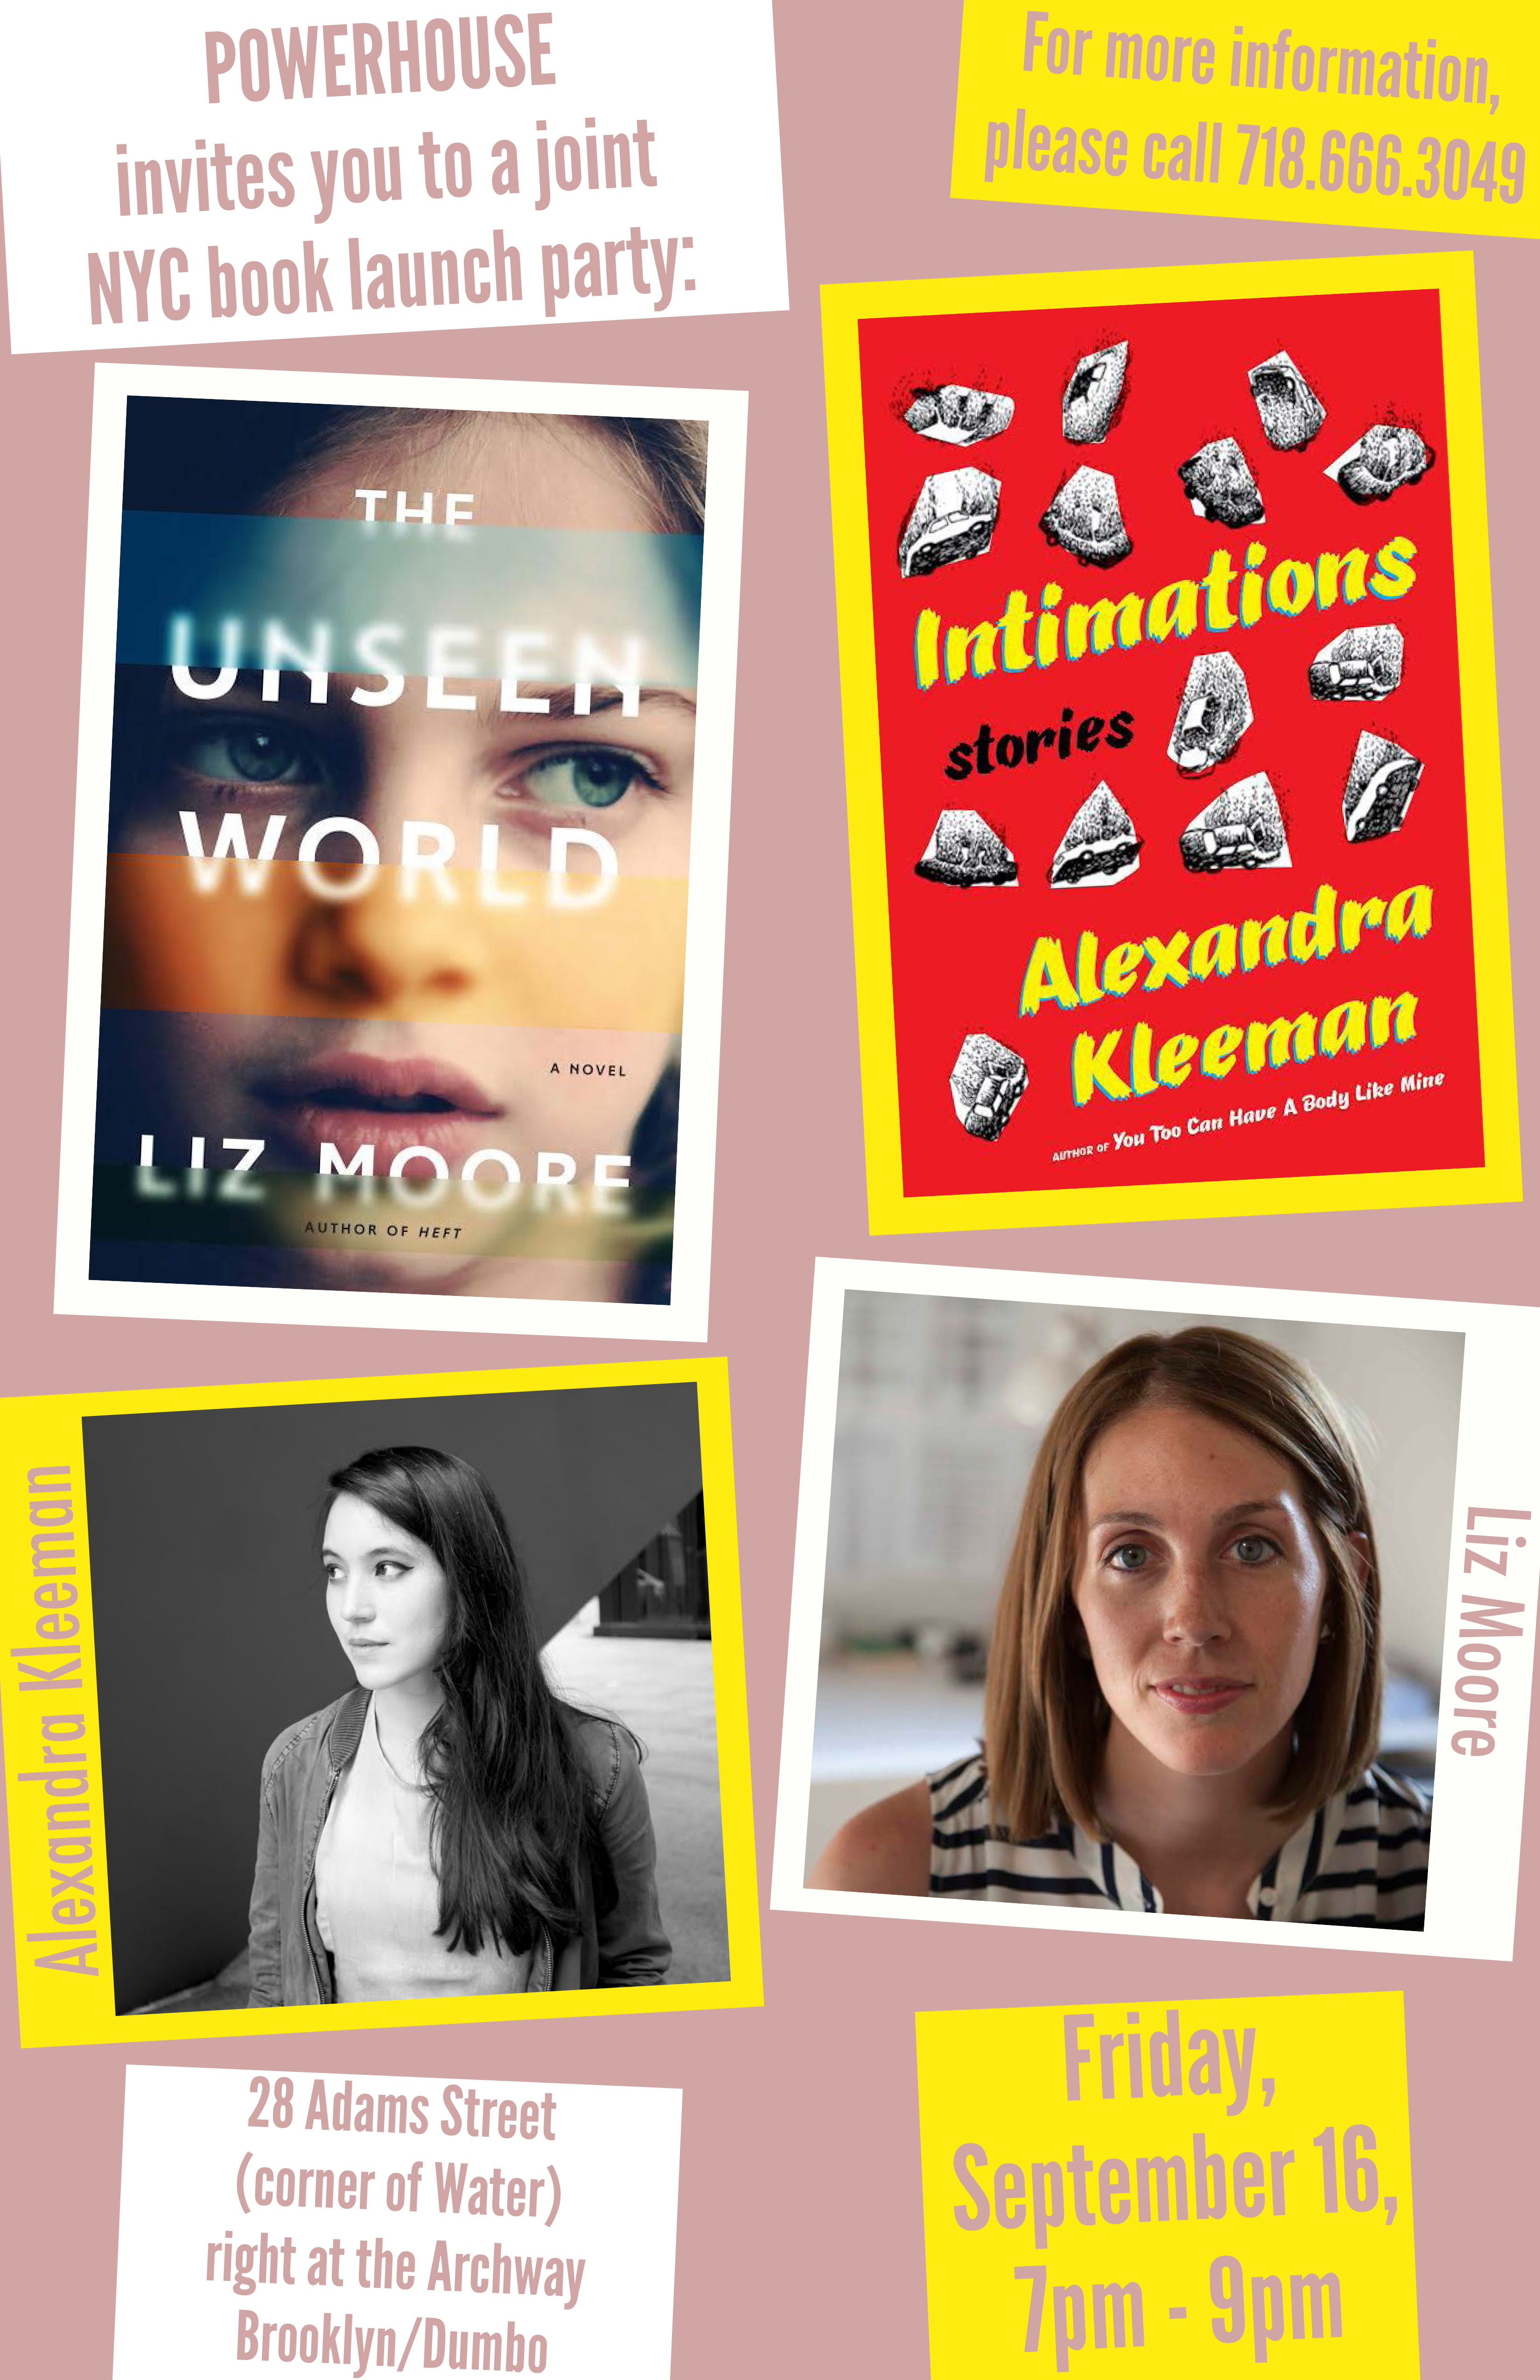 Joint Book Launch: Intimations by Alexandra Kleeman and And The Unseen World by Liz Moore